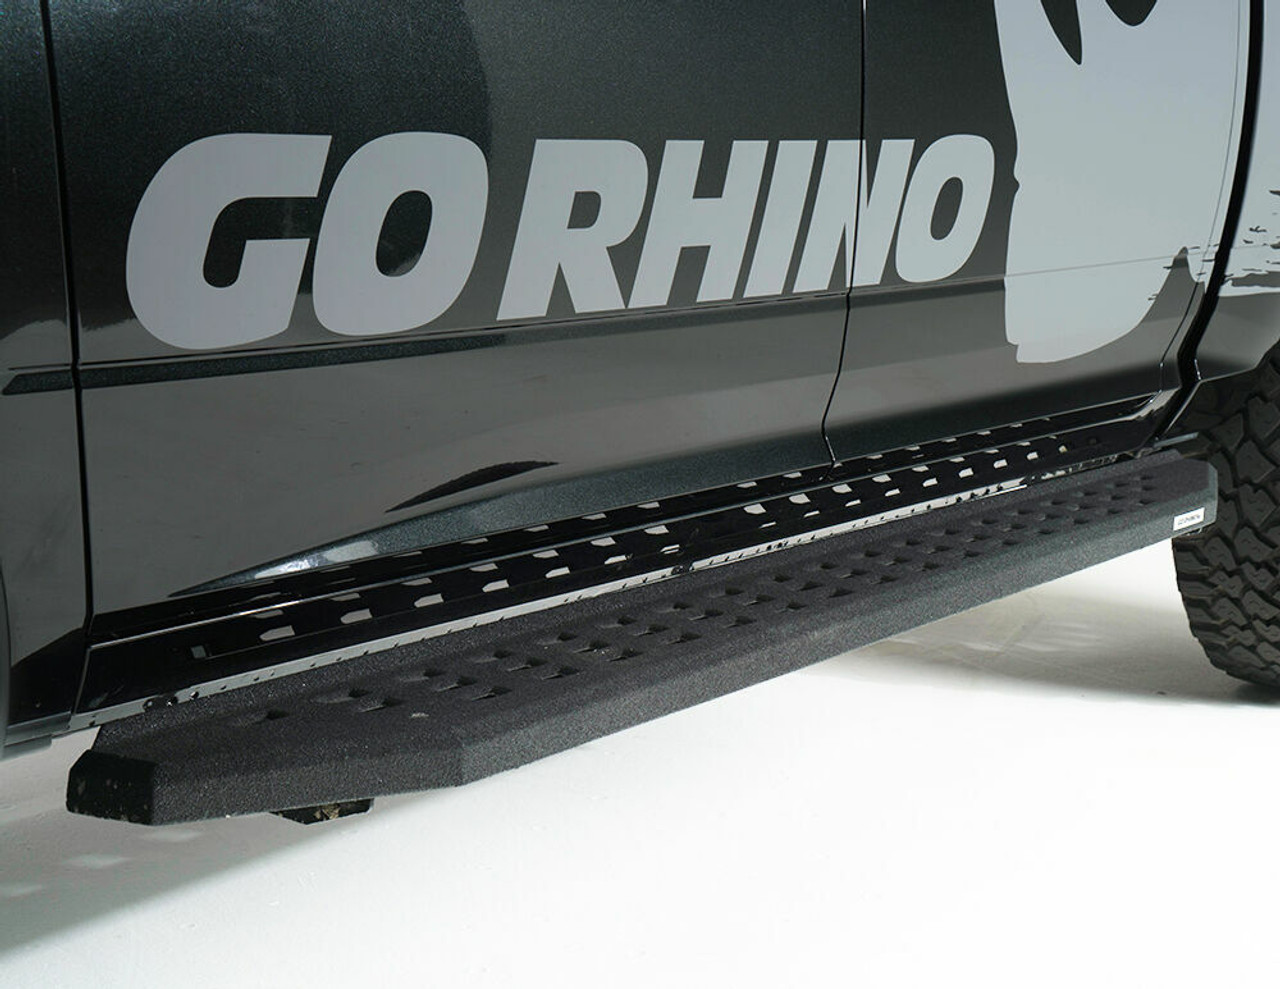 Go Rhino 6903688020T Ford, Ranger, 2019 - 2021, RB20 Running boards - Complete Kit:  2 pair RB20 Drop Steps, Galvanized Steel, Protective Bedliner coating, 69400080T RB20 + 6903685 RB Brackets + (2) 69420000T Drop Down Step